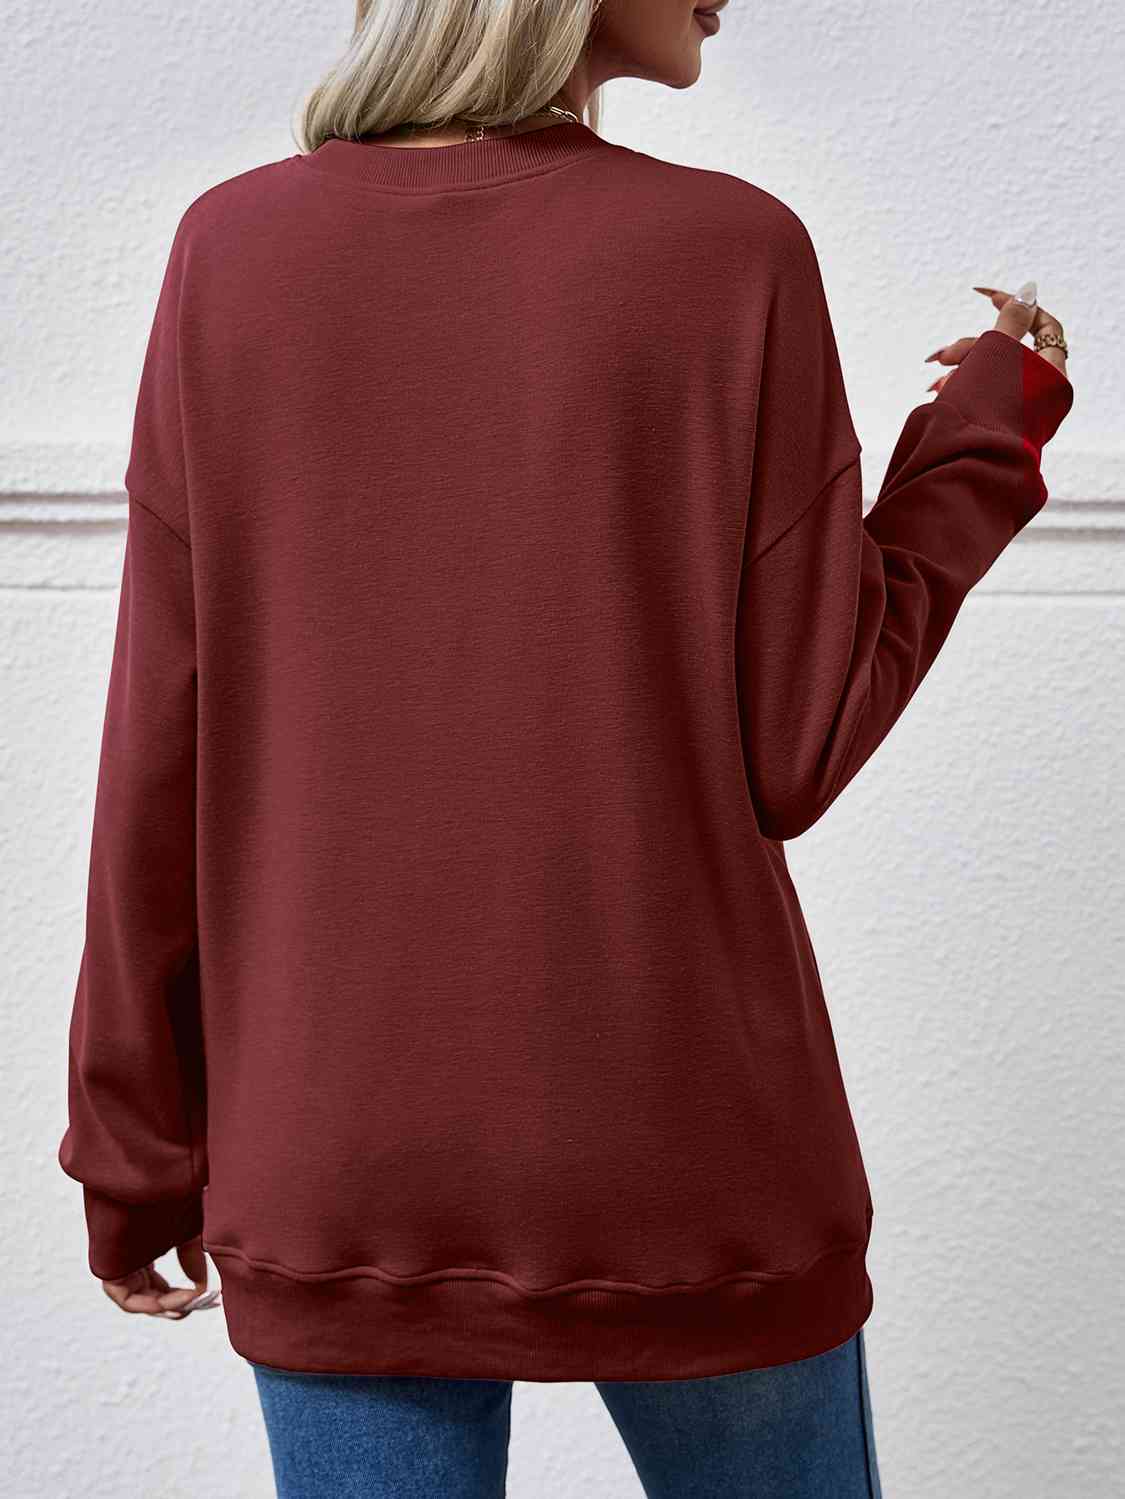 PREORDER- Dropped Shoulder Sweatshirt with Pockets